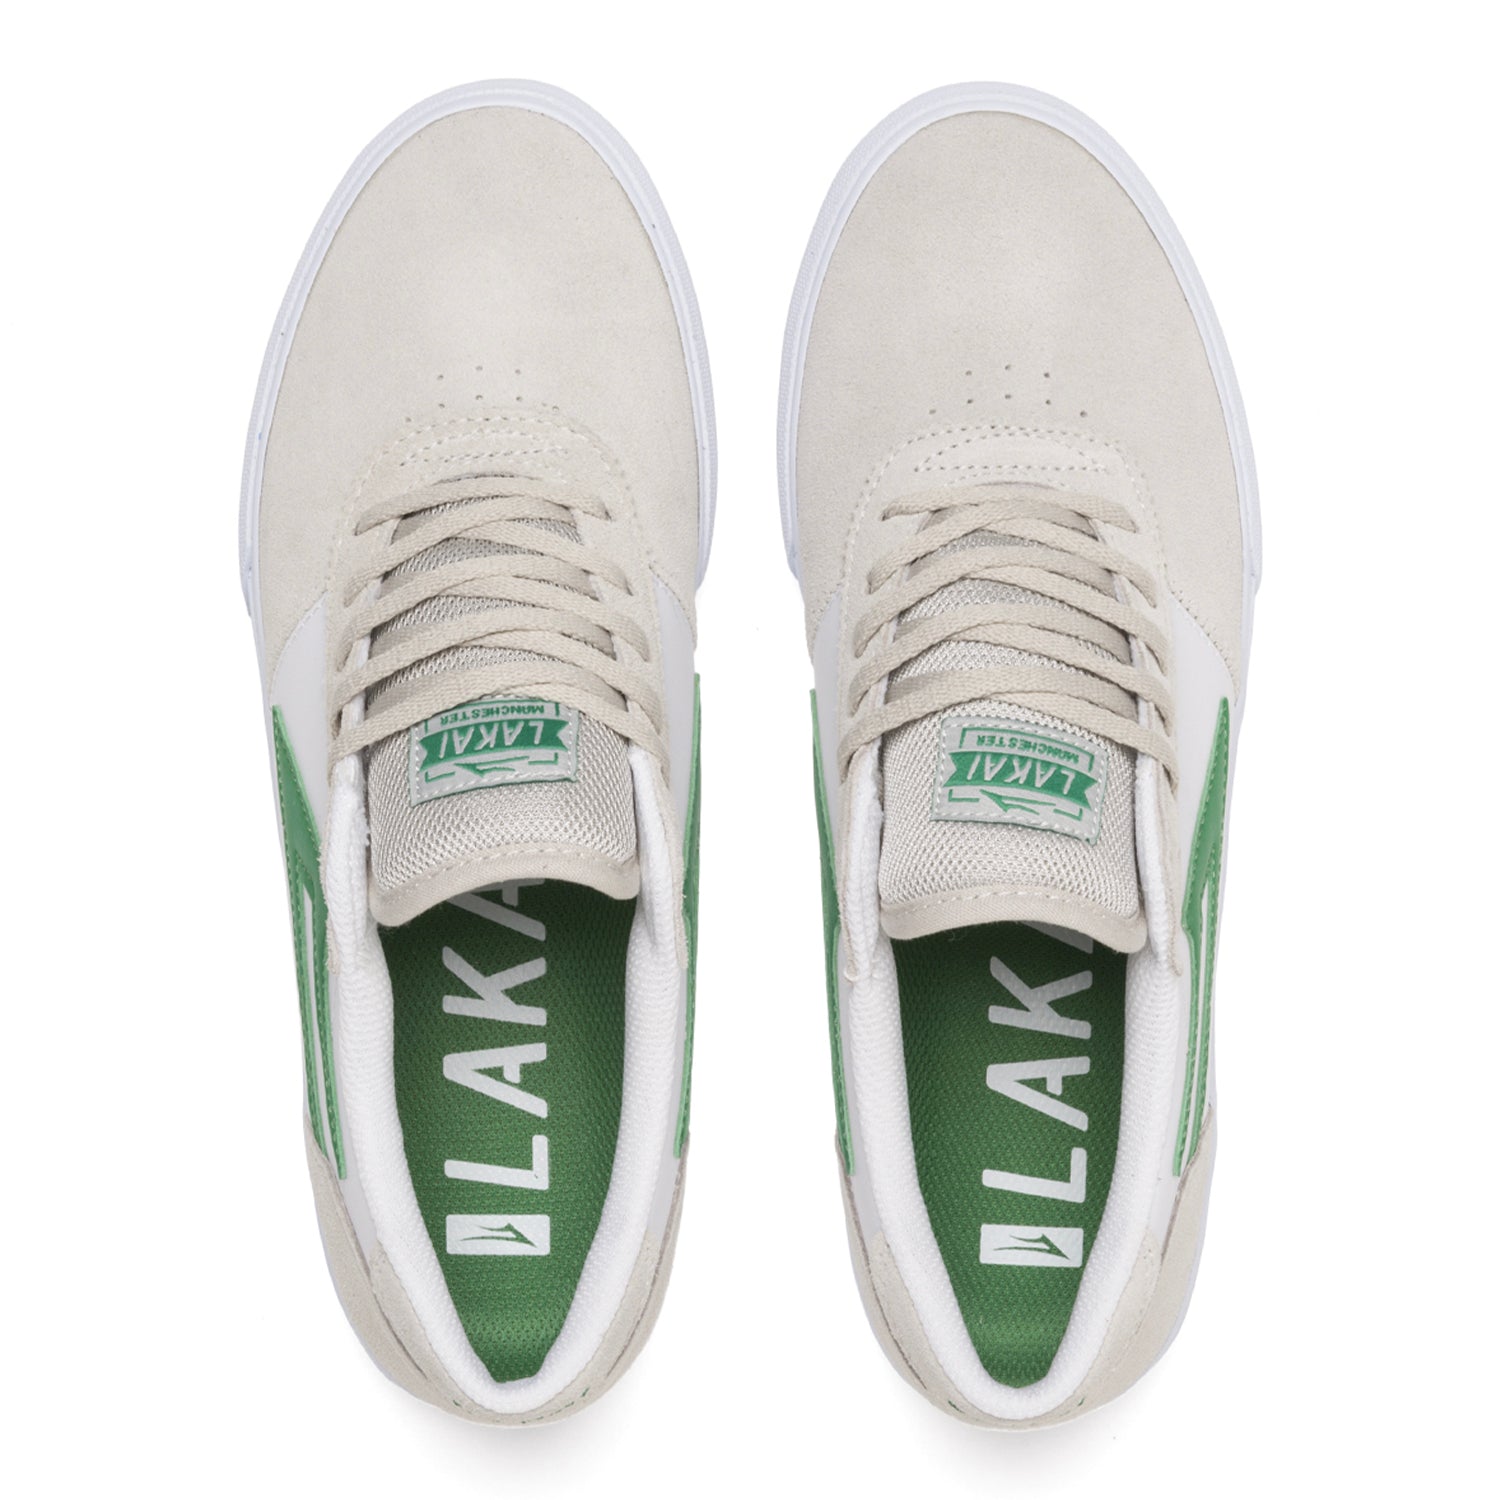 Lakai Manchester Shoes - White / Grass Suede - Prime Delux Store